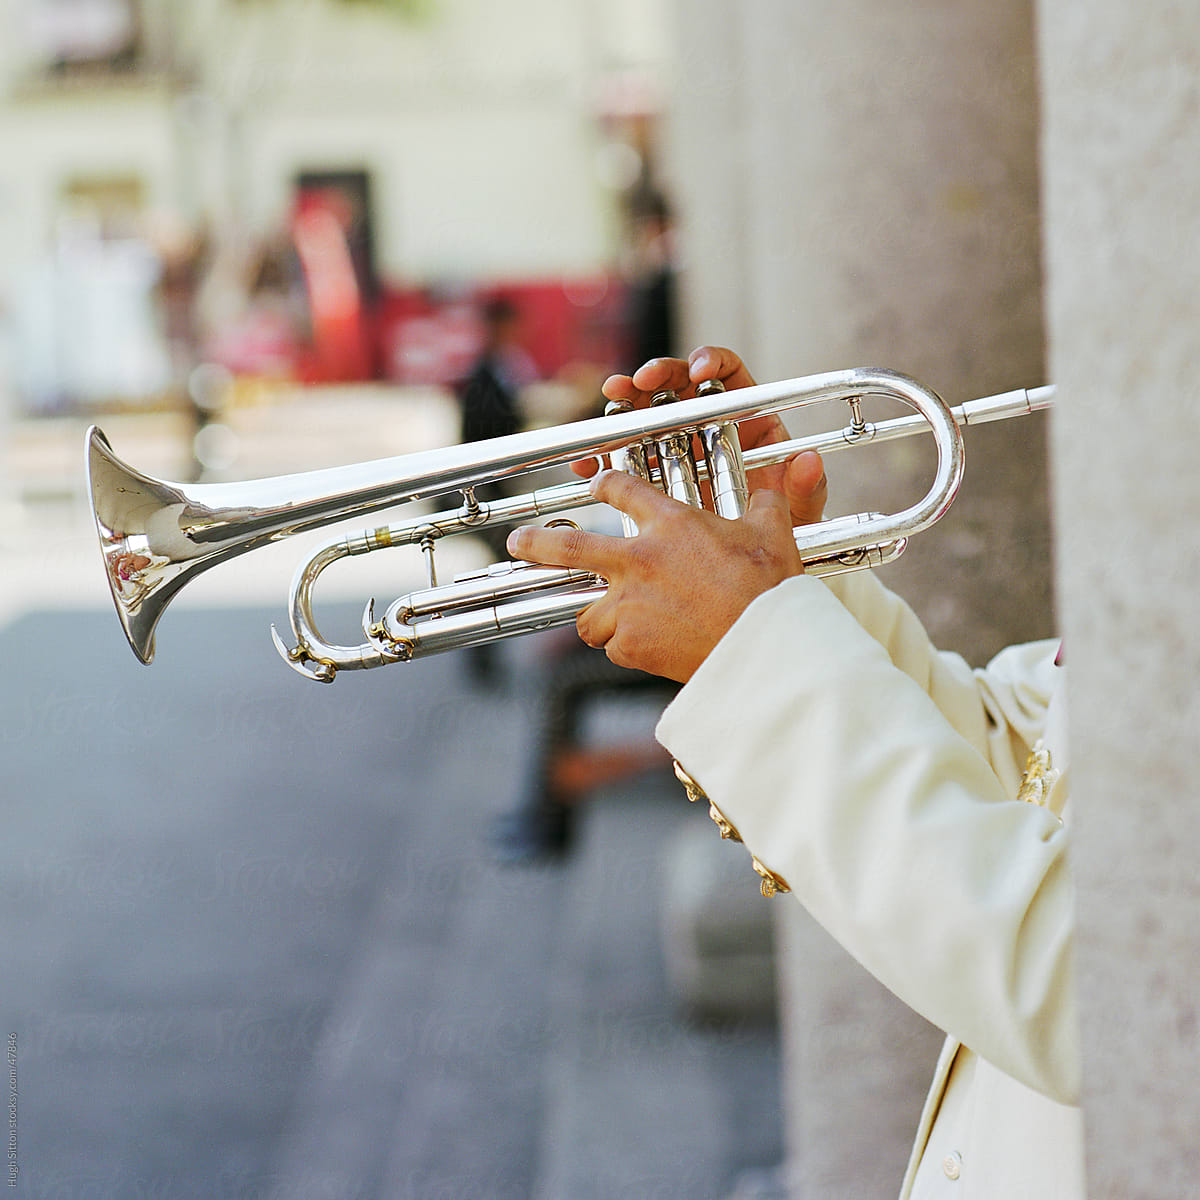 Musician playing trumpet, partially obscured by pillar. Mexico